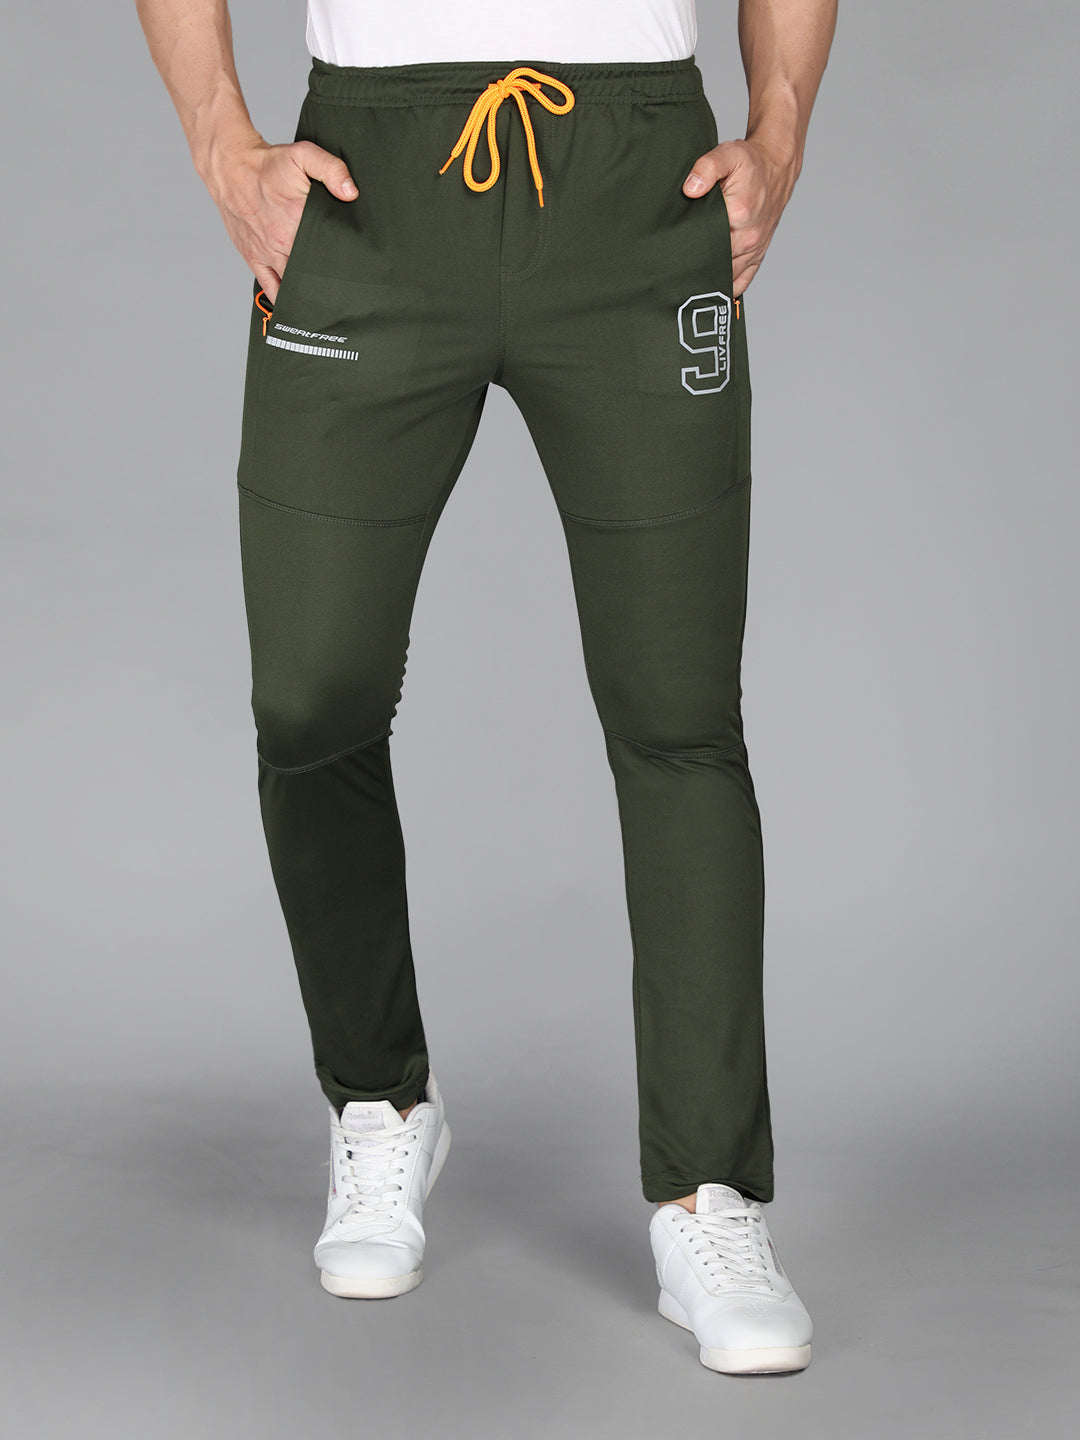 Mens Hip Hop Cargo Pants With Letter Ribbons, Hit Color Design, Pocket  Square, And Sweatpants Streetwear Cargo Trousers Primark For Casual Wear  201110 From Mu02, $21.1 | DHgate.Com